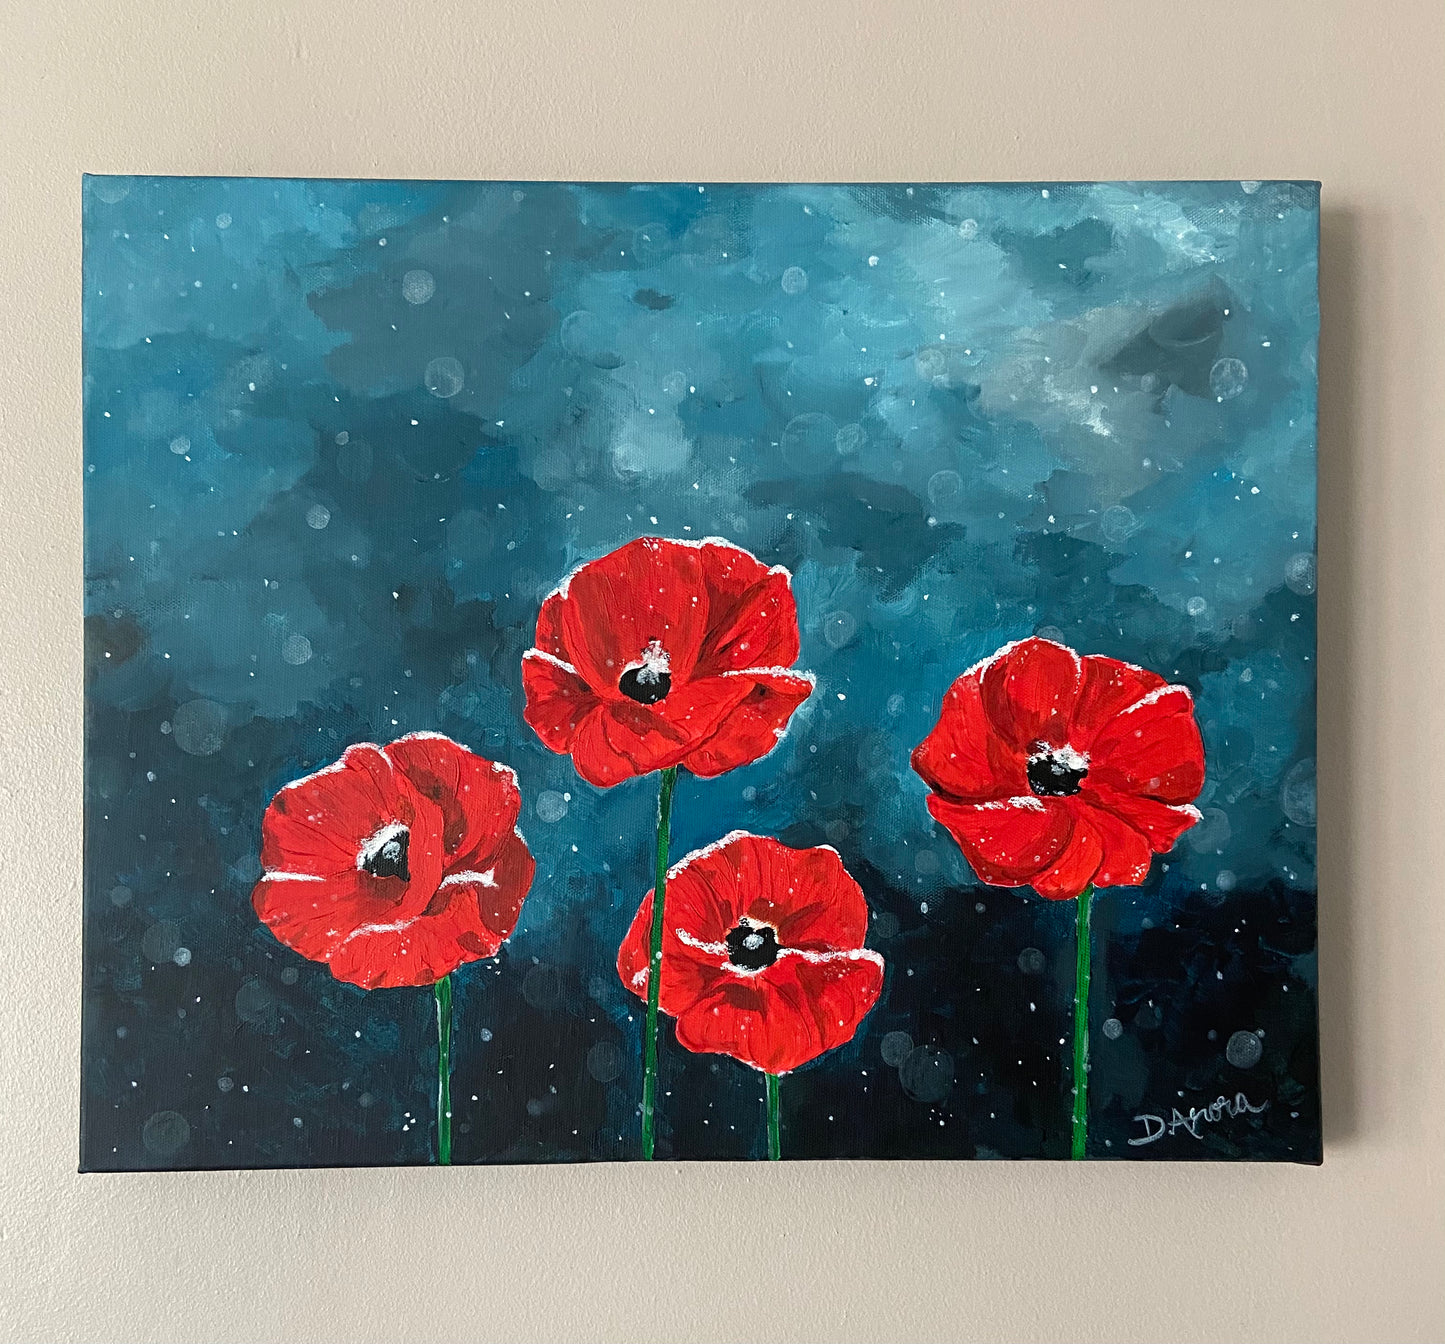 The Poppies